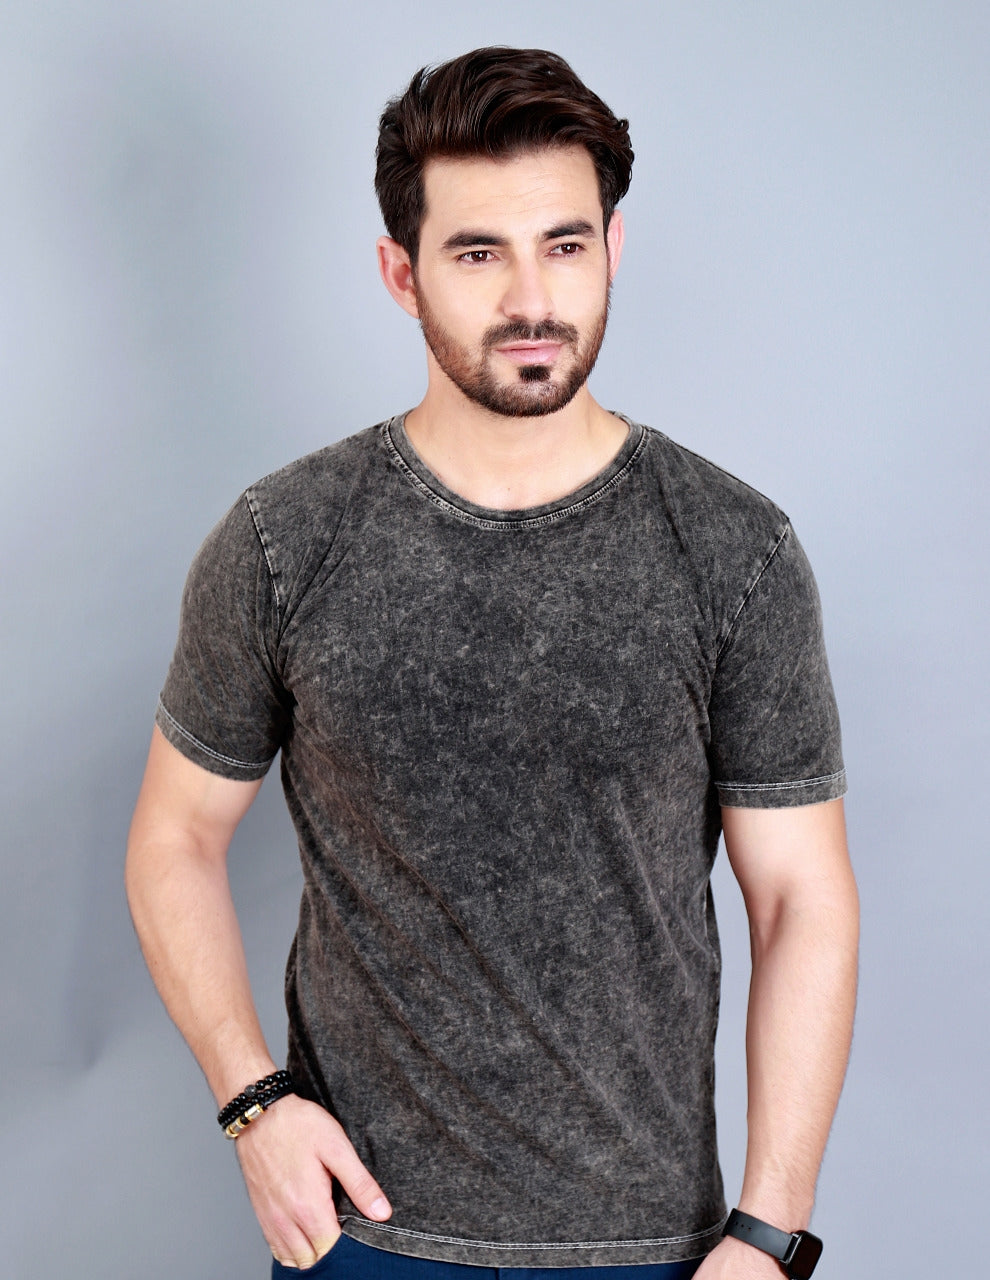 Men's Charcoal Round Neck Half Sleeve T-Shirt - ACE 44001 (S20)